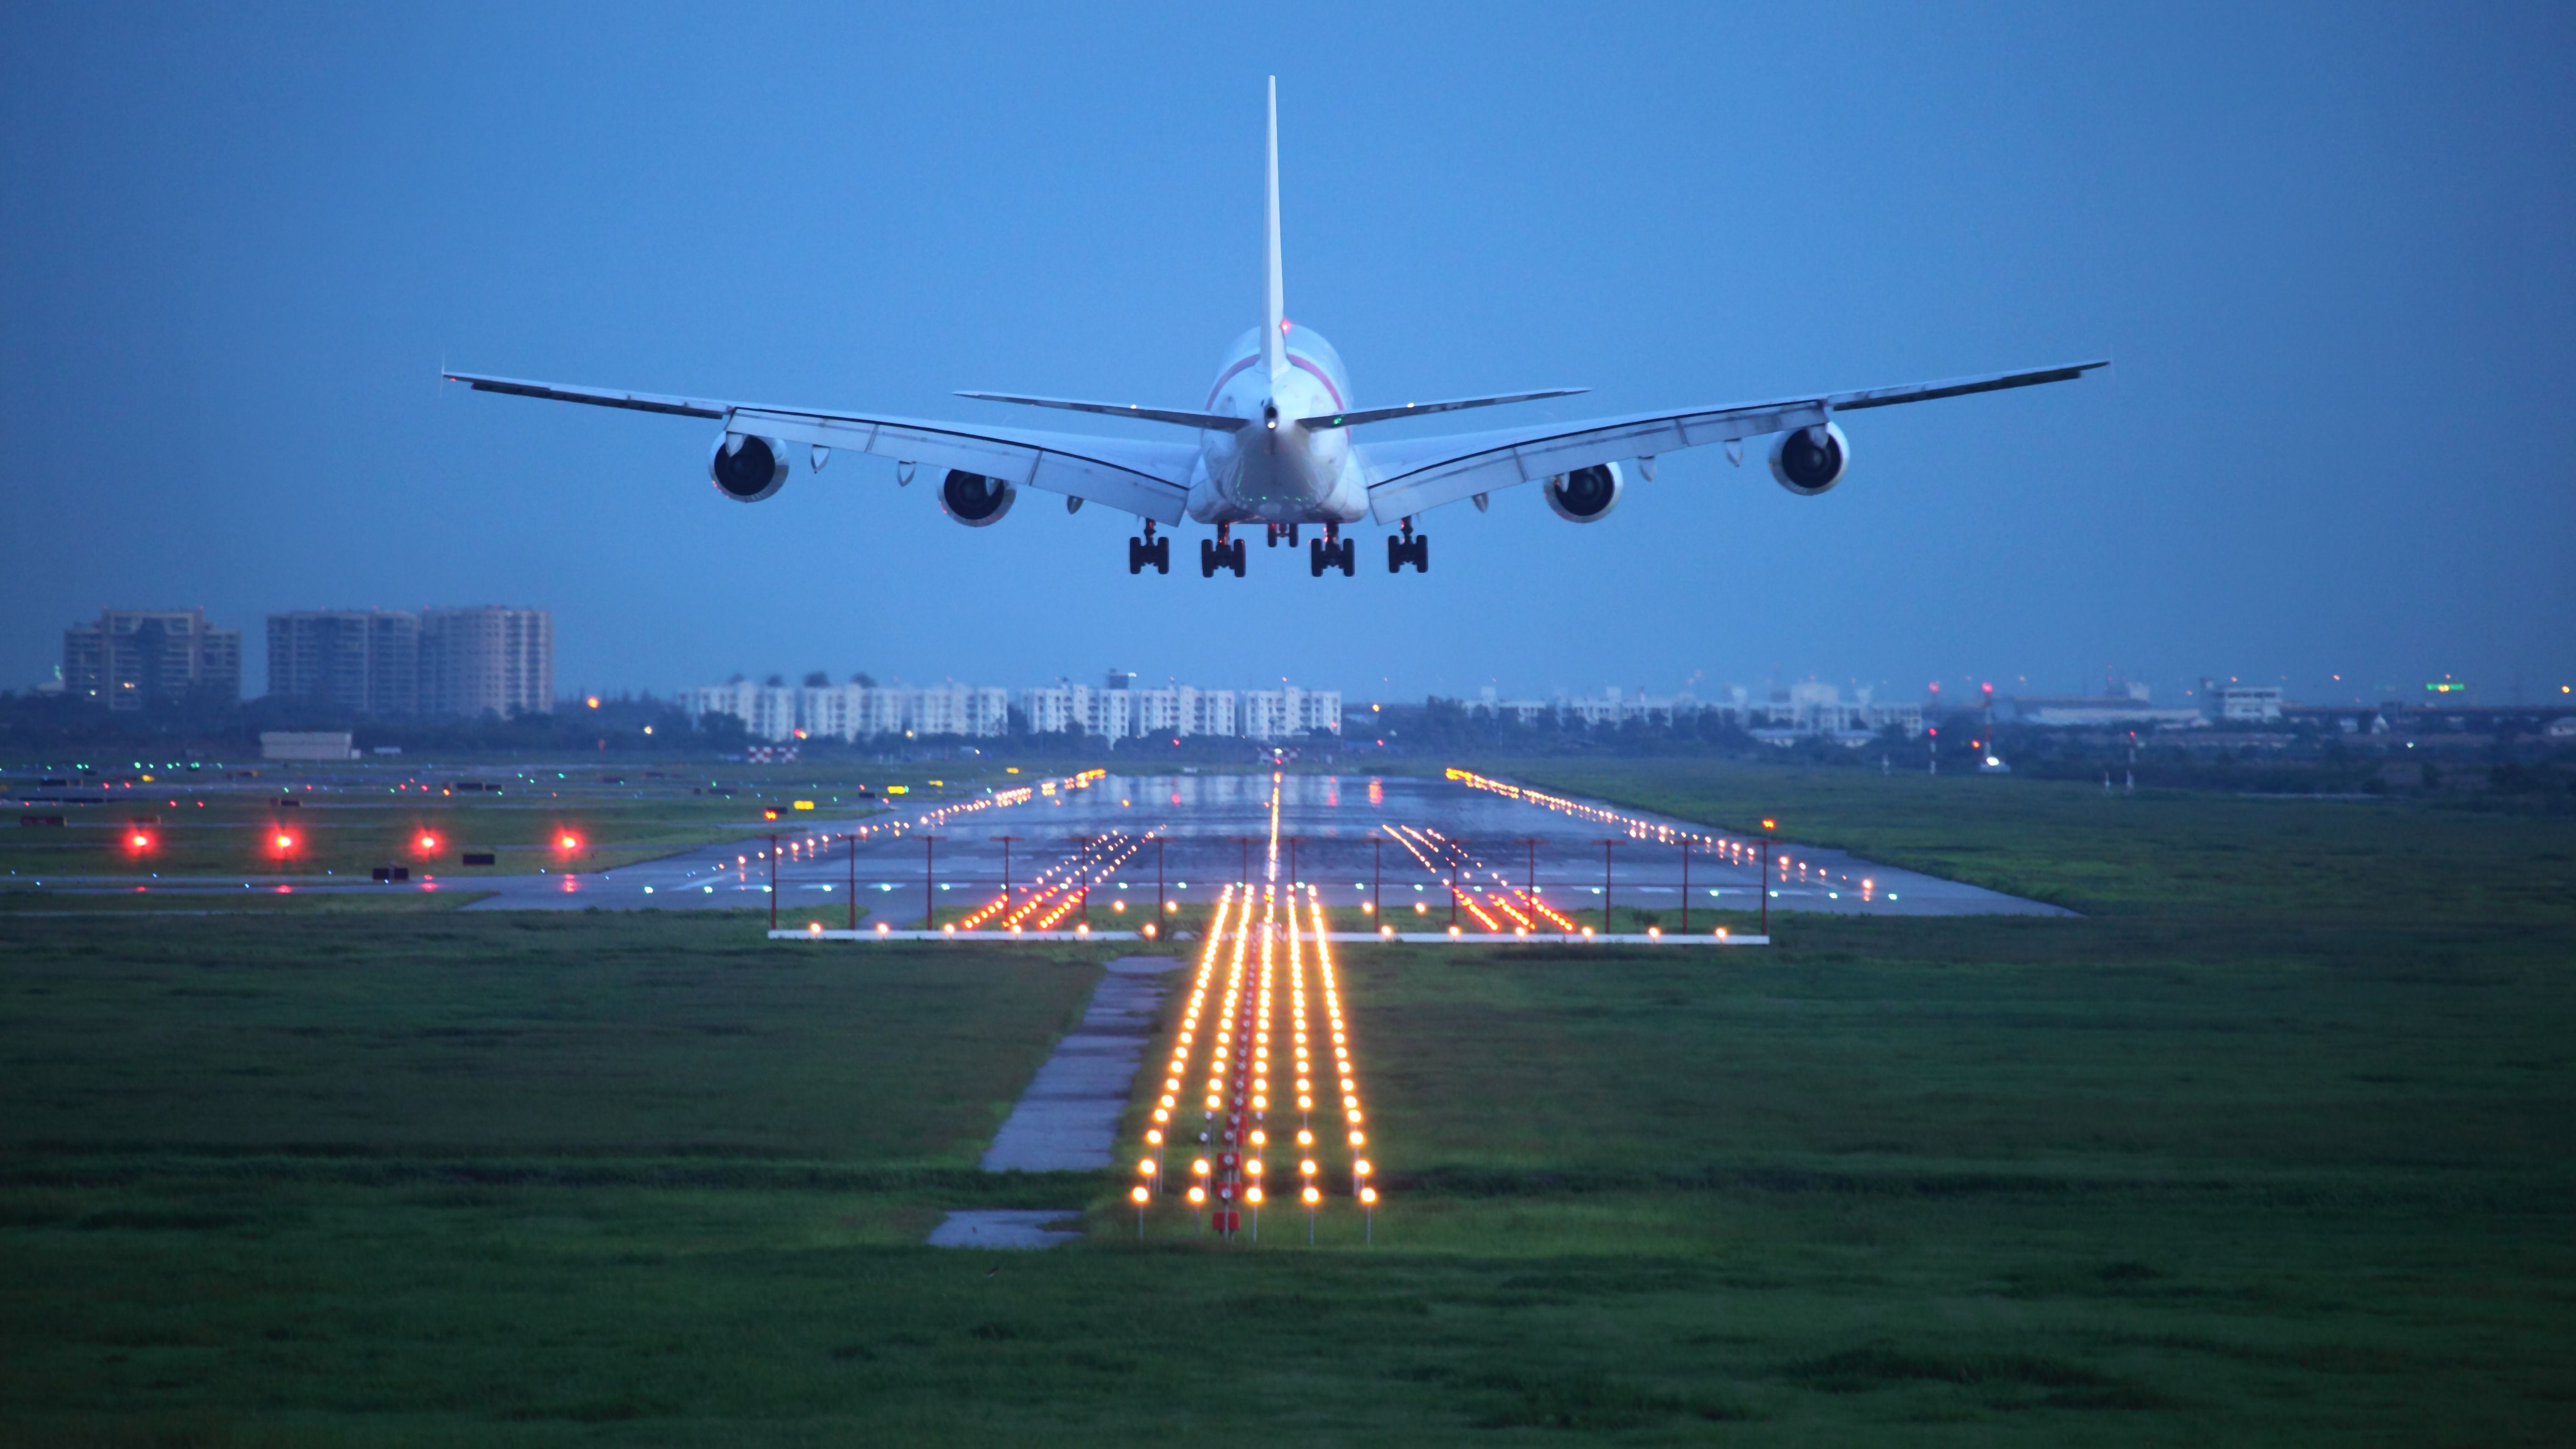 An Airbus A380 about to land on a runway.